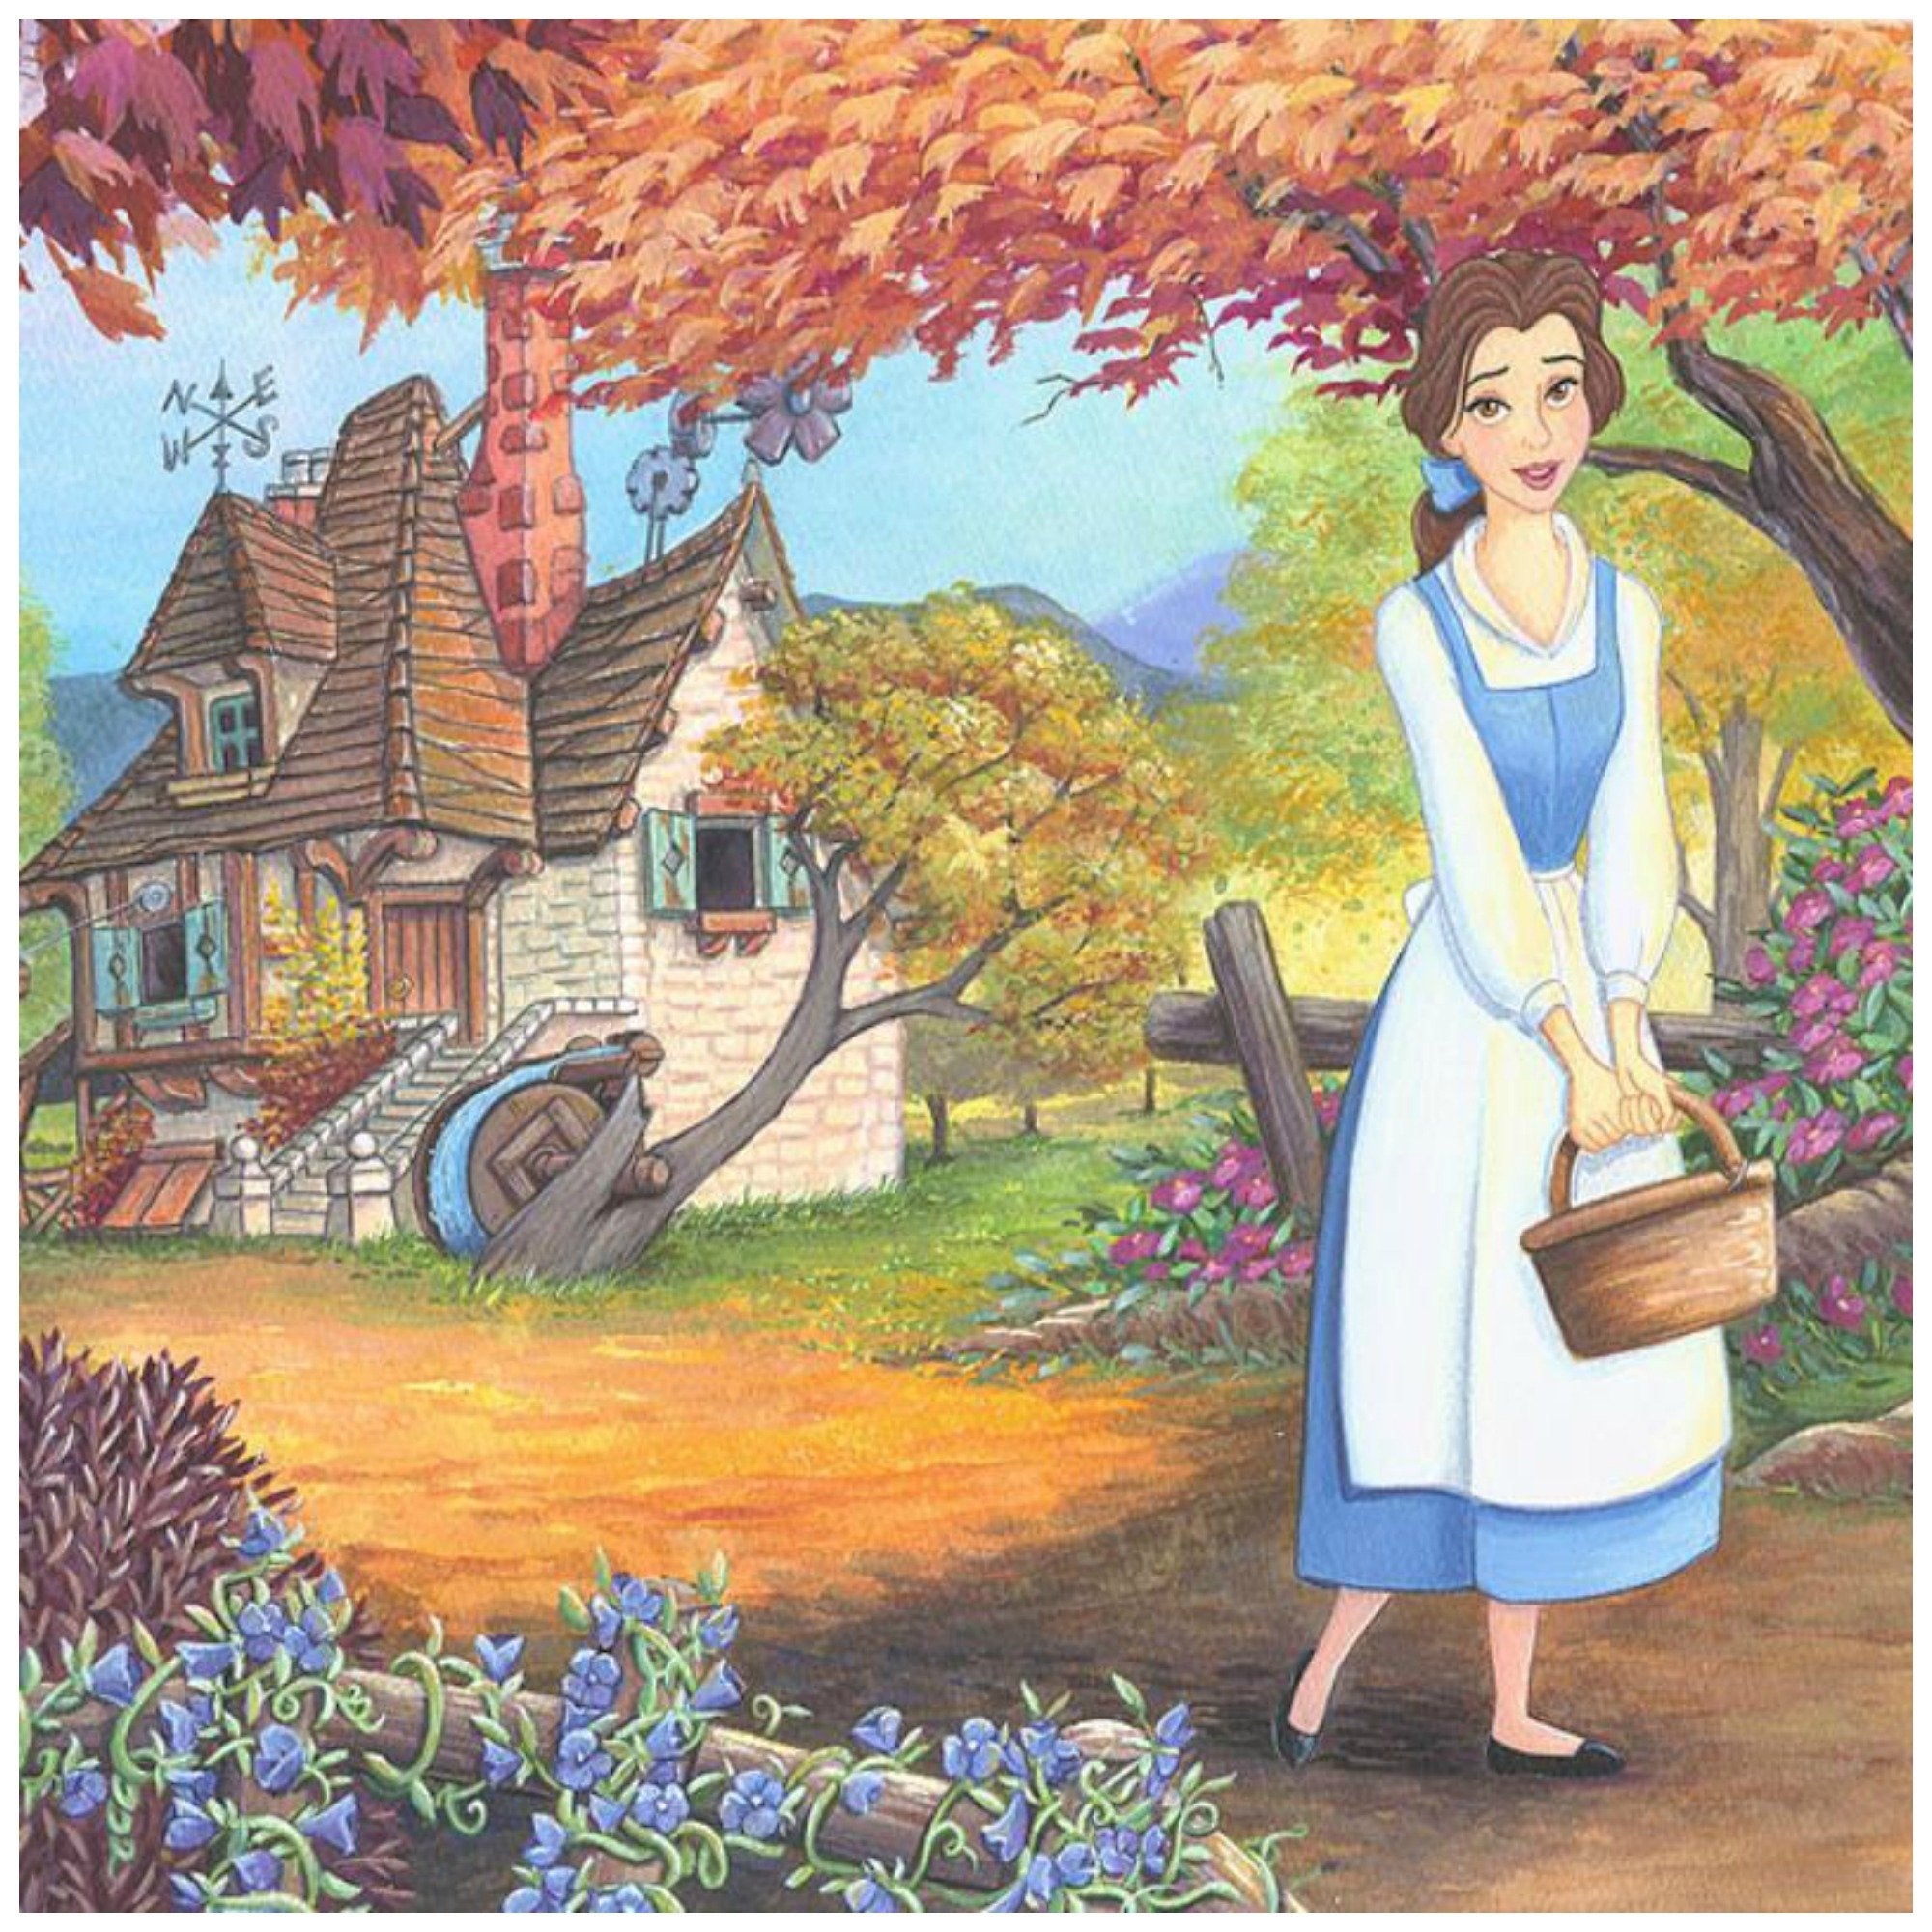 The Flowery Path by Michelle St. Laurent.  Belle strolls through flowery path near the village, holding her basket - closeup